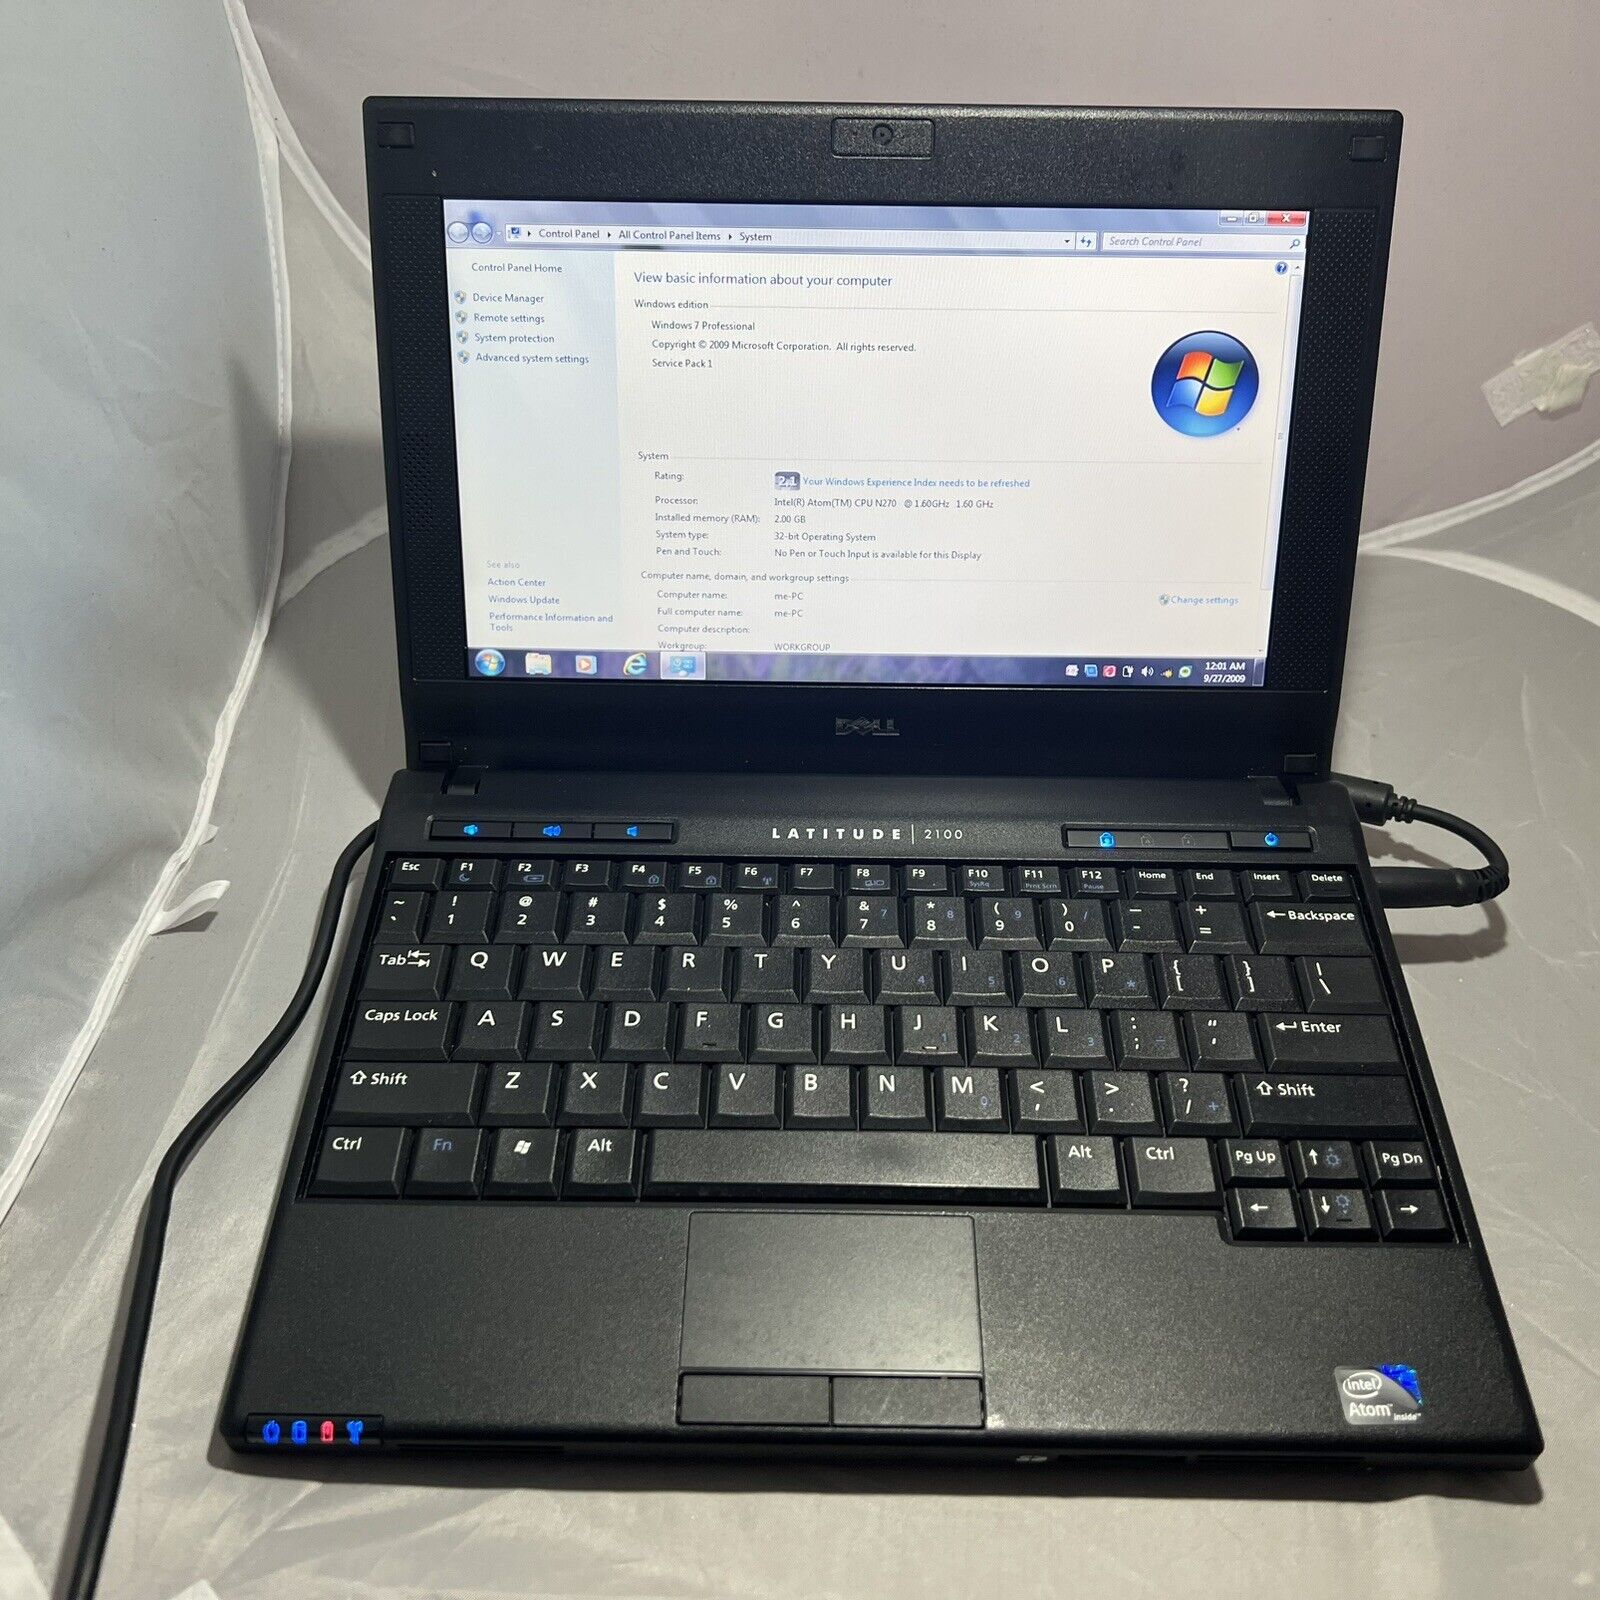 Dell Latitude 2100 Mini-Laptop With Charger Dead Battery